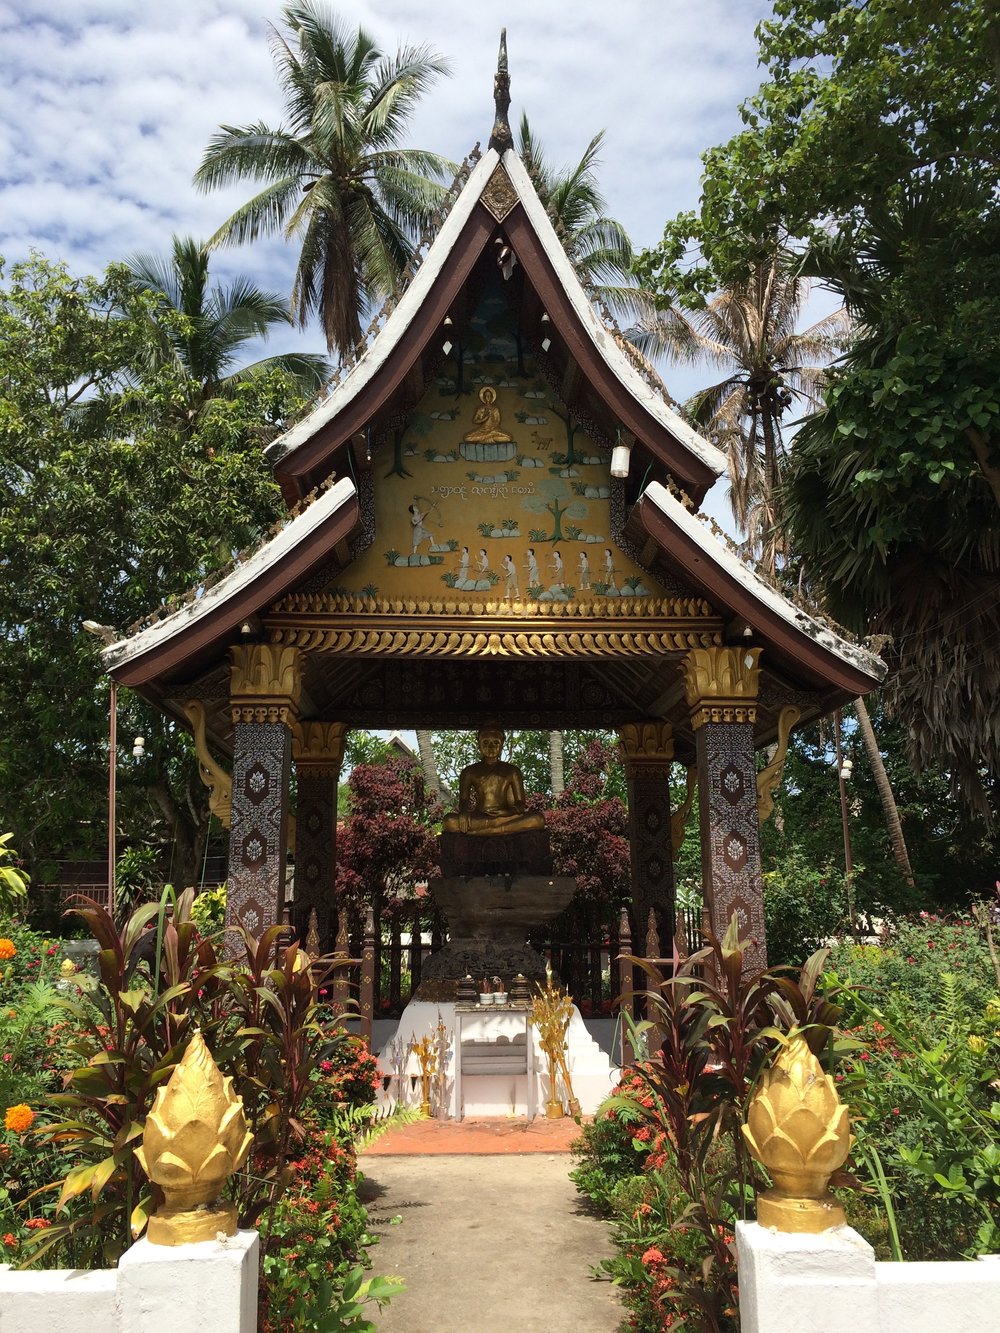 Is there a reason that Lao temples bring in nature?